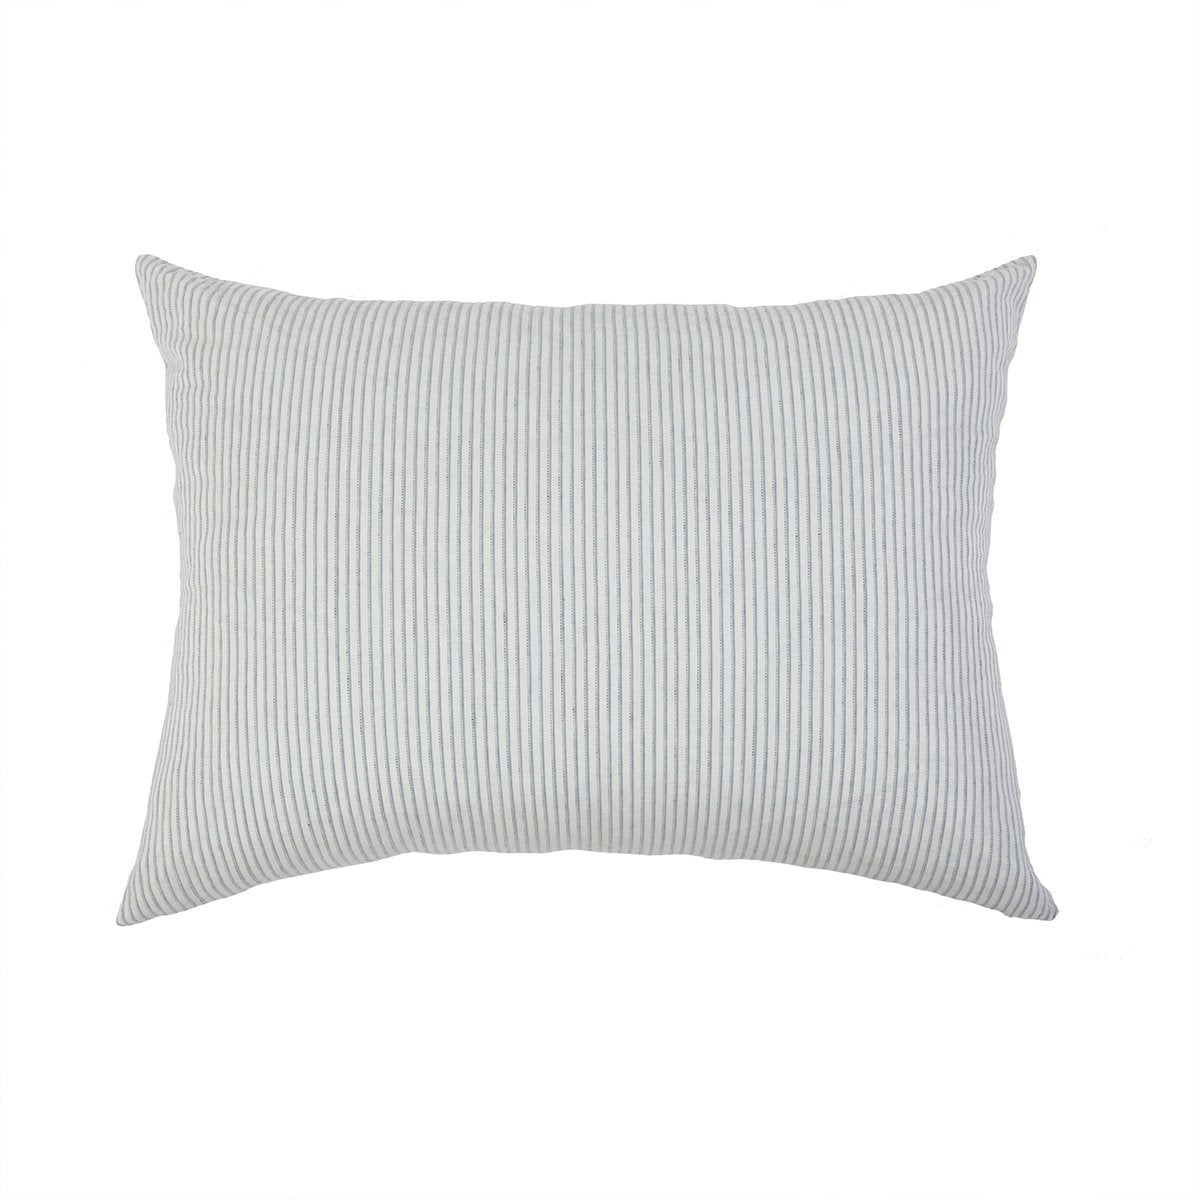 CONNOR BIG PILLOW 28&quot; X 36&quot; WITH INSERT - Ivory/Denim -Pom Pom at Home